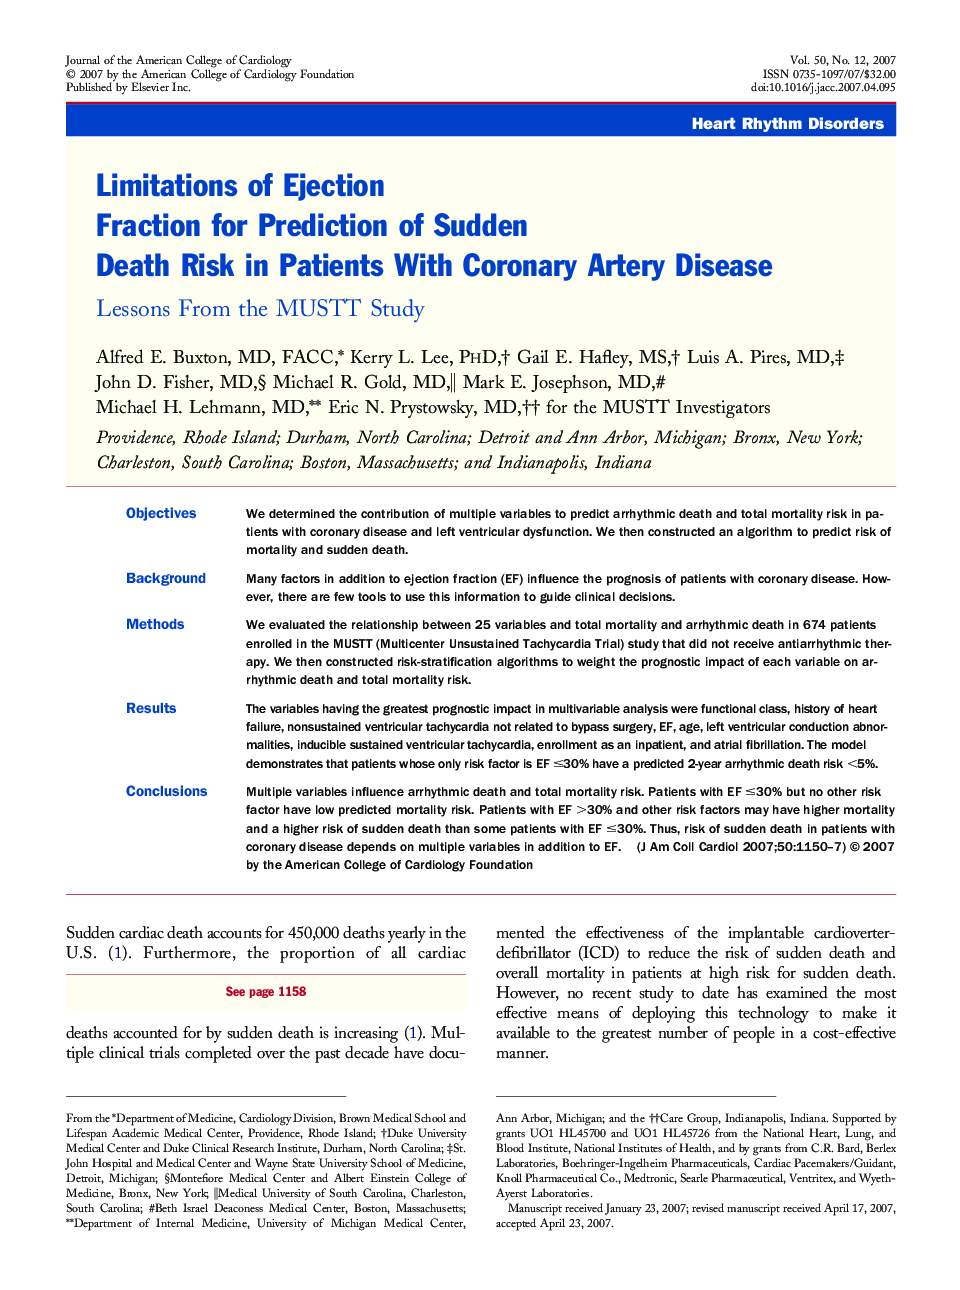 Limitations of Ejection Fraction for Prediction of Sudden Death Risk in Patients With Coronary Artery Disease : Lessons From the MUSTT Study